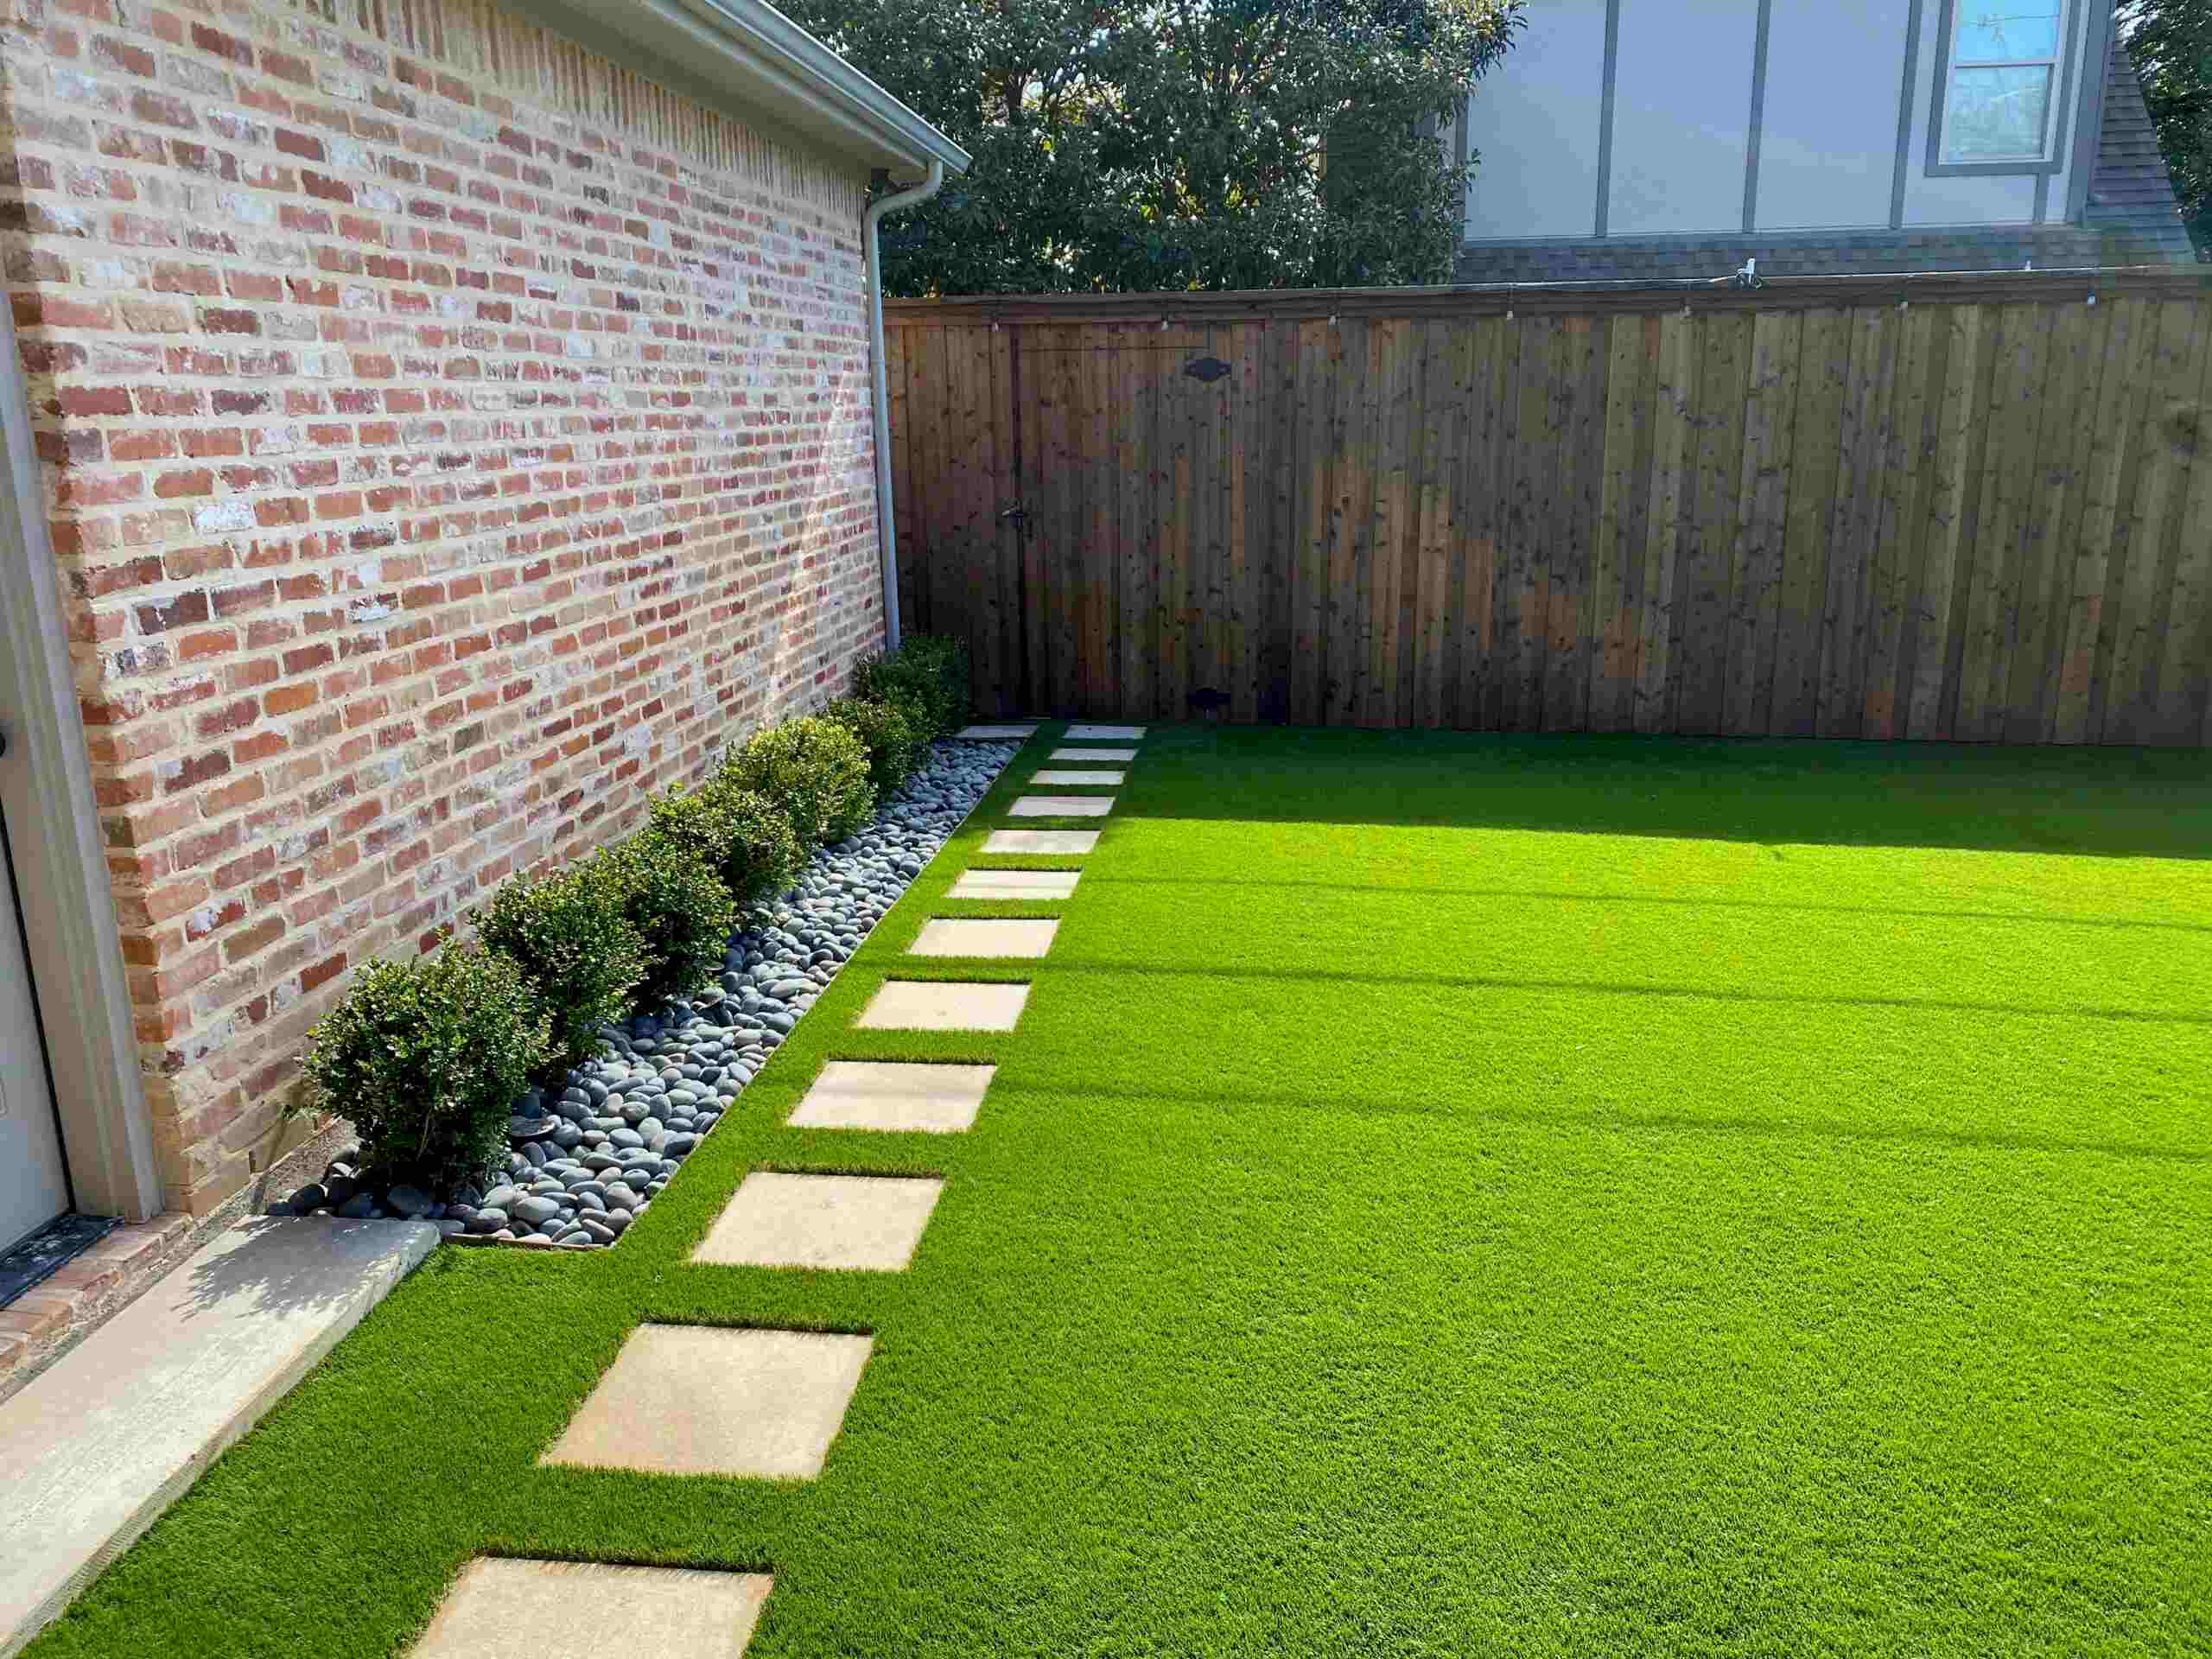 How To Install Turf In Your Backyard